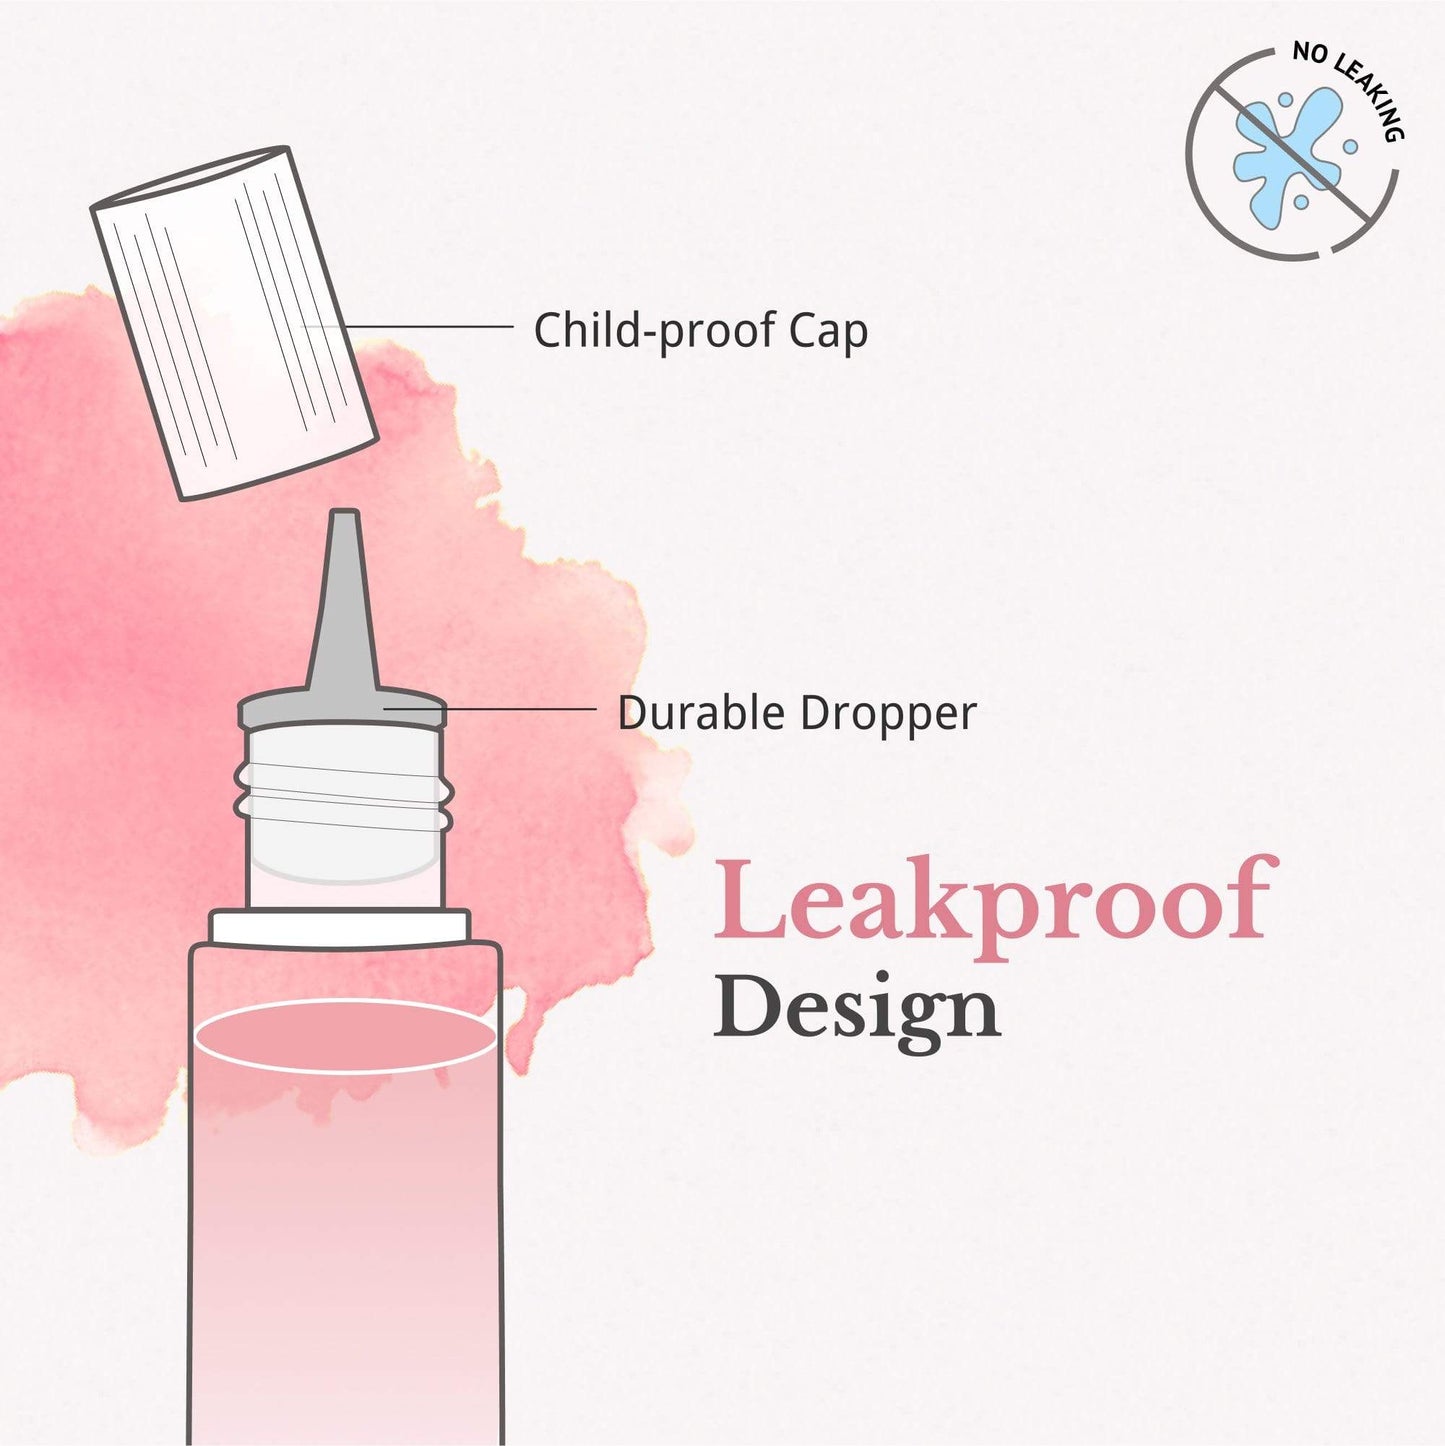 Leak proof design with child proof cap and durable dropper